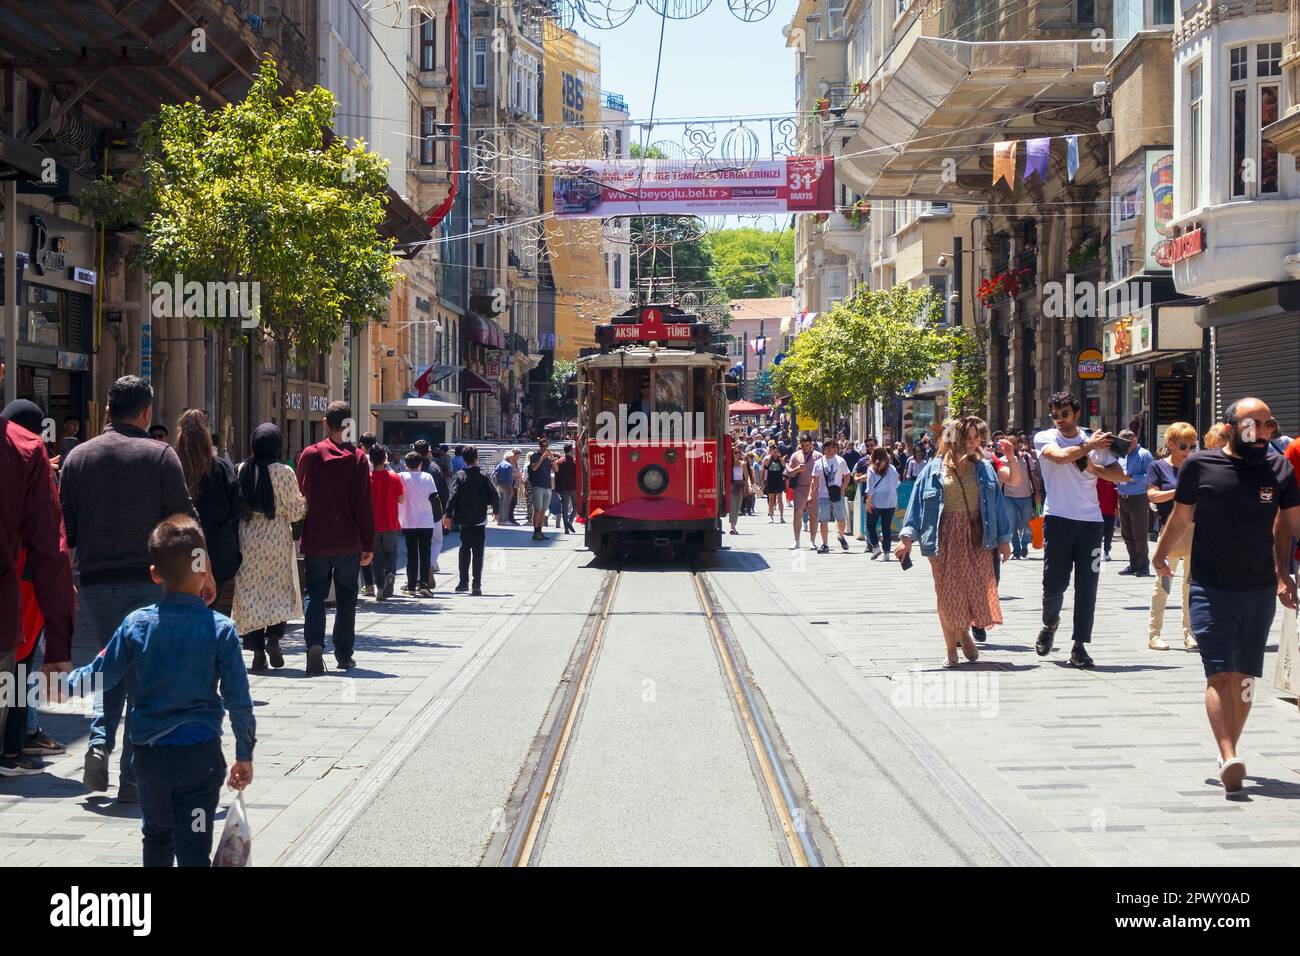 Istanbul, Turkey - May, 2022. Istiklal Street and red tram, the most famous street and entertainment area in the center of Istanbul, Turkey. Stock Photo